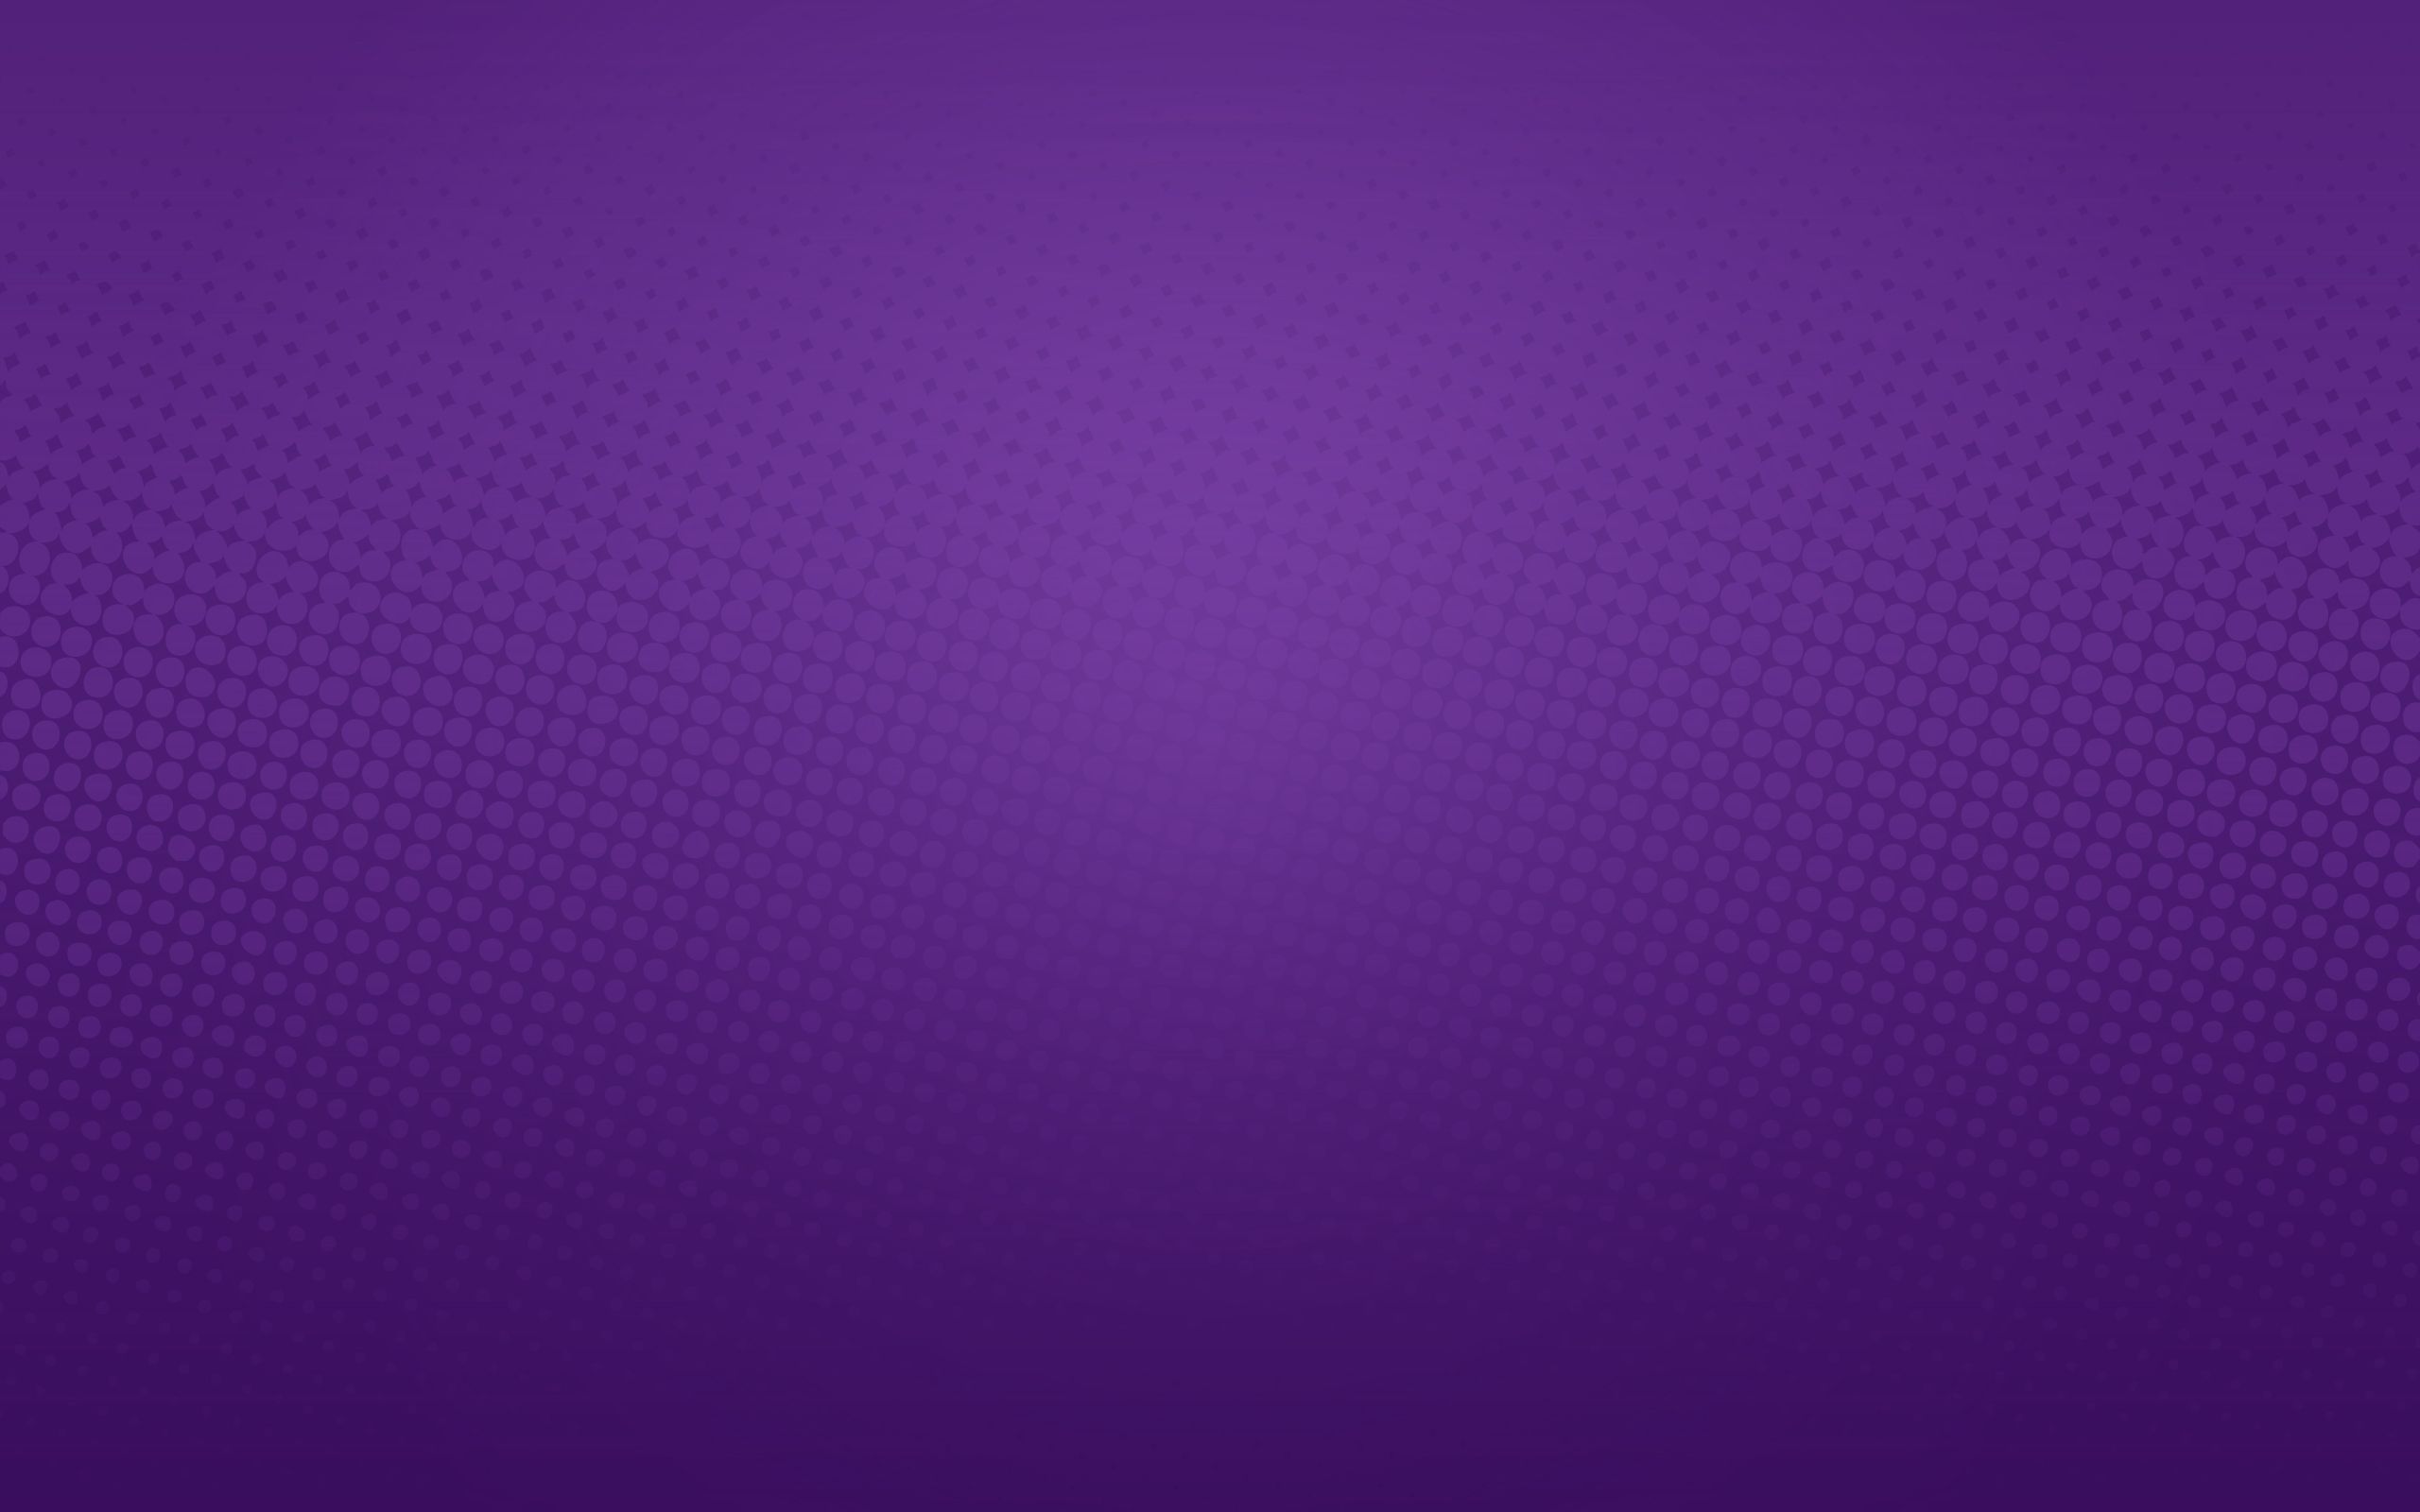 PURPLE WALLPAPER | New Hd Template İmages